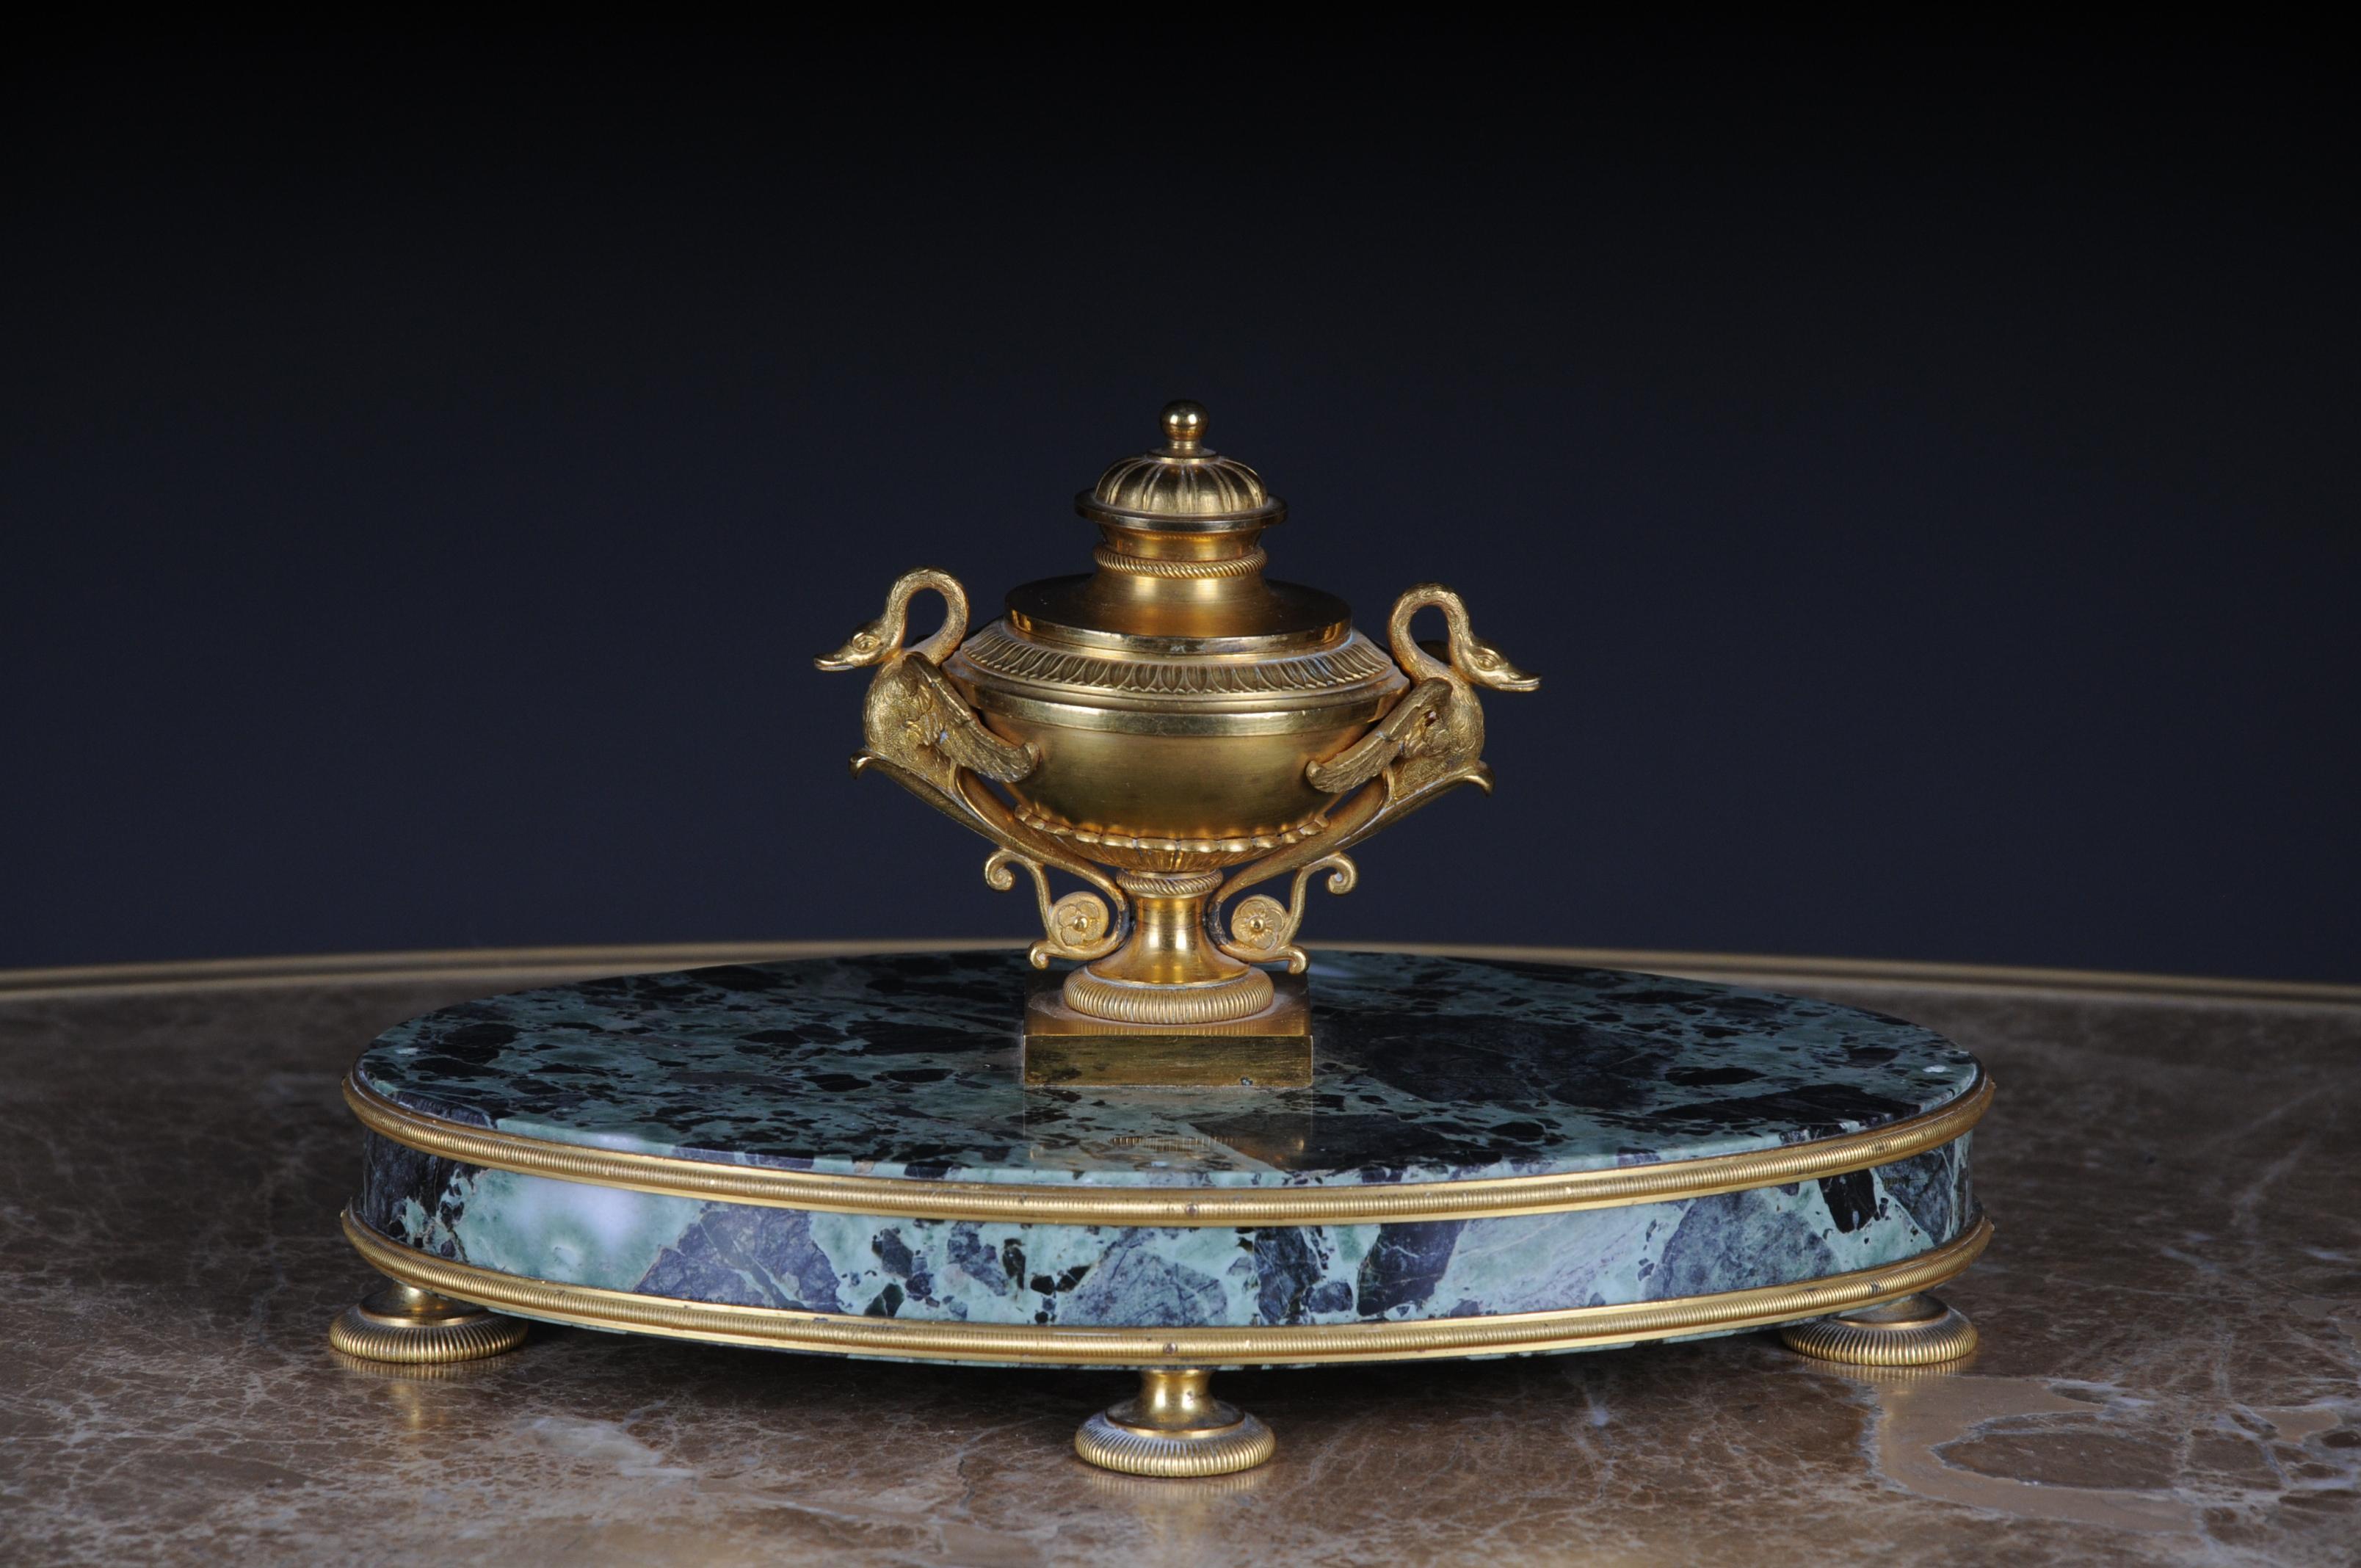 Empire bronze writing set inkwell 19th century fire-gilt
Beautiful Empire inkwell with finely chased and fire-gilt bronze.
Green-black mottled marble plinth.

(T-48).
 